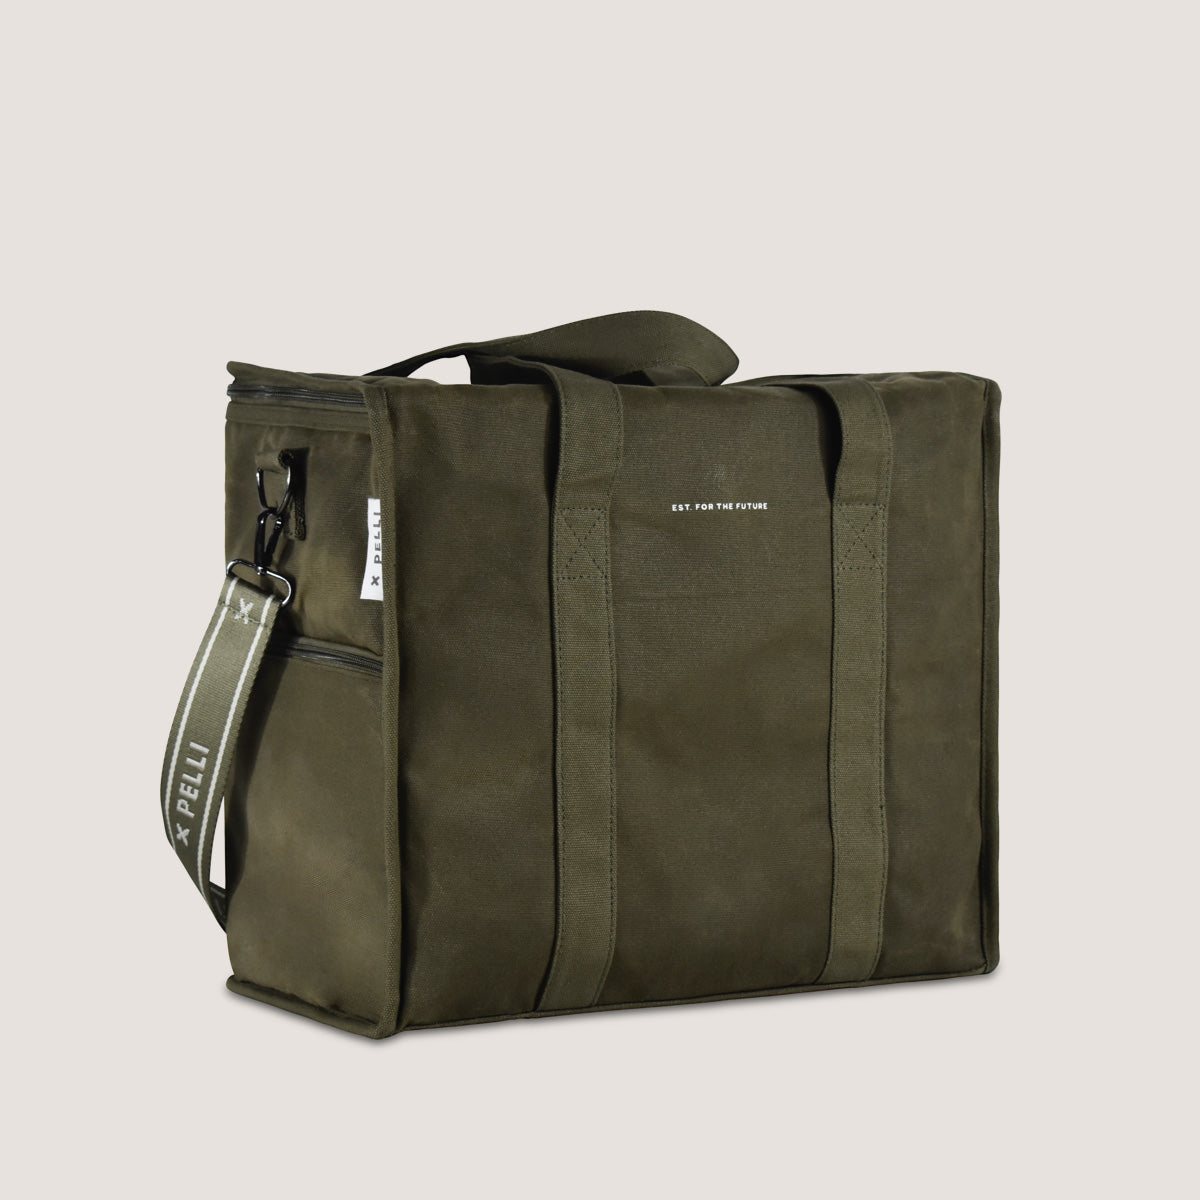 SECONDS Chill Homie Crossbody Waxed Canvas Large Cooler Bag - Burnt Olive Green